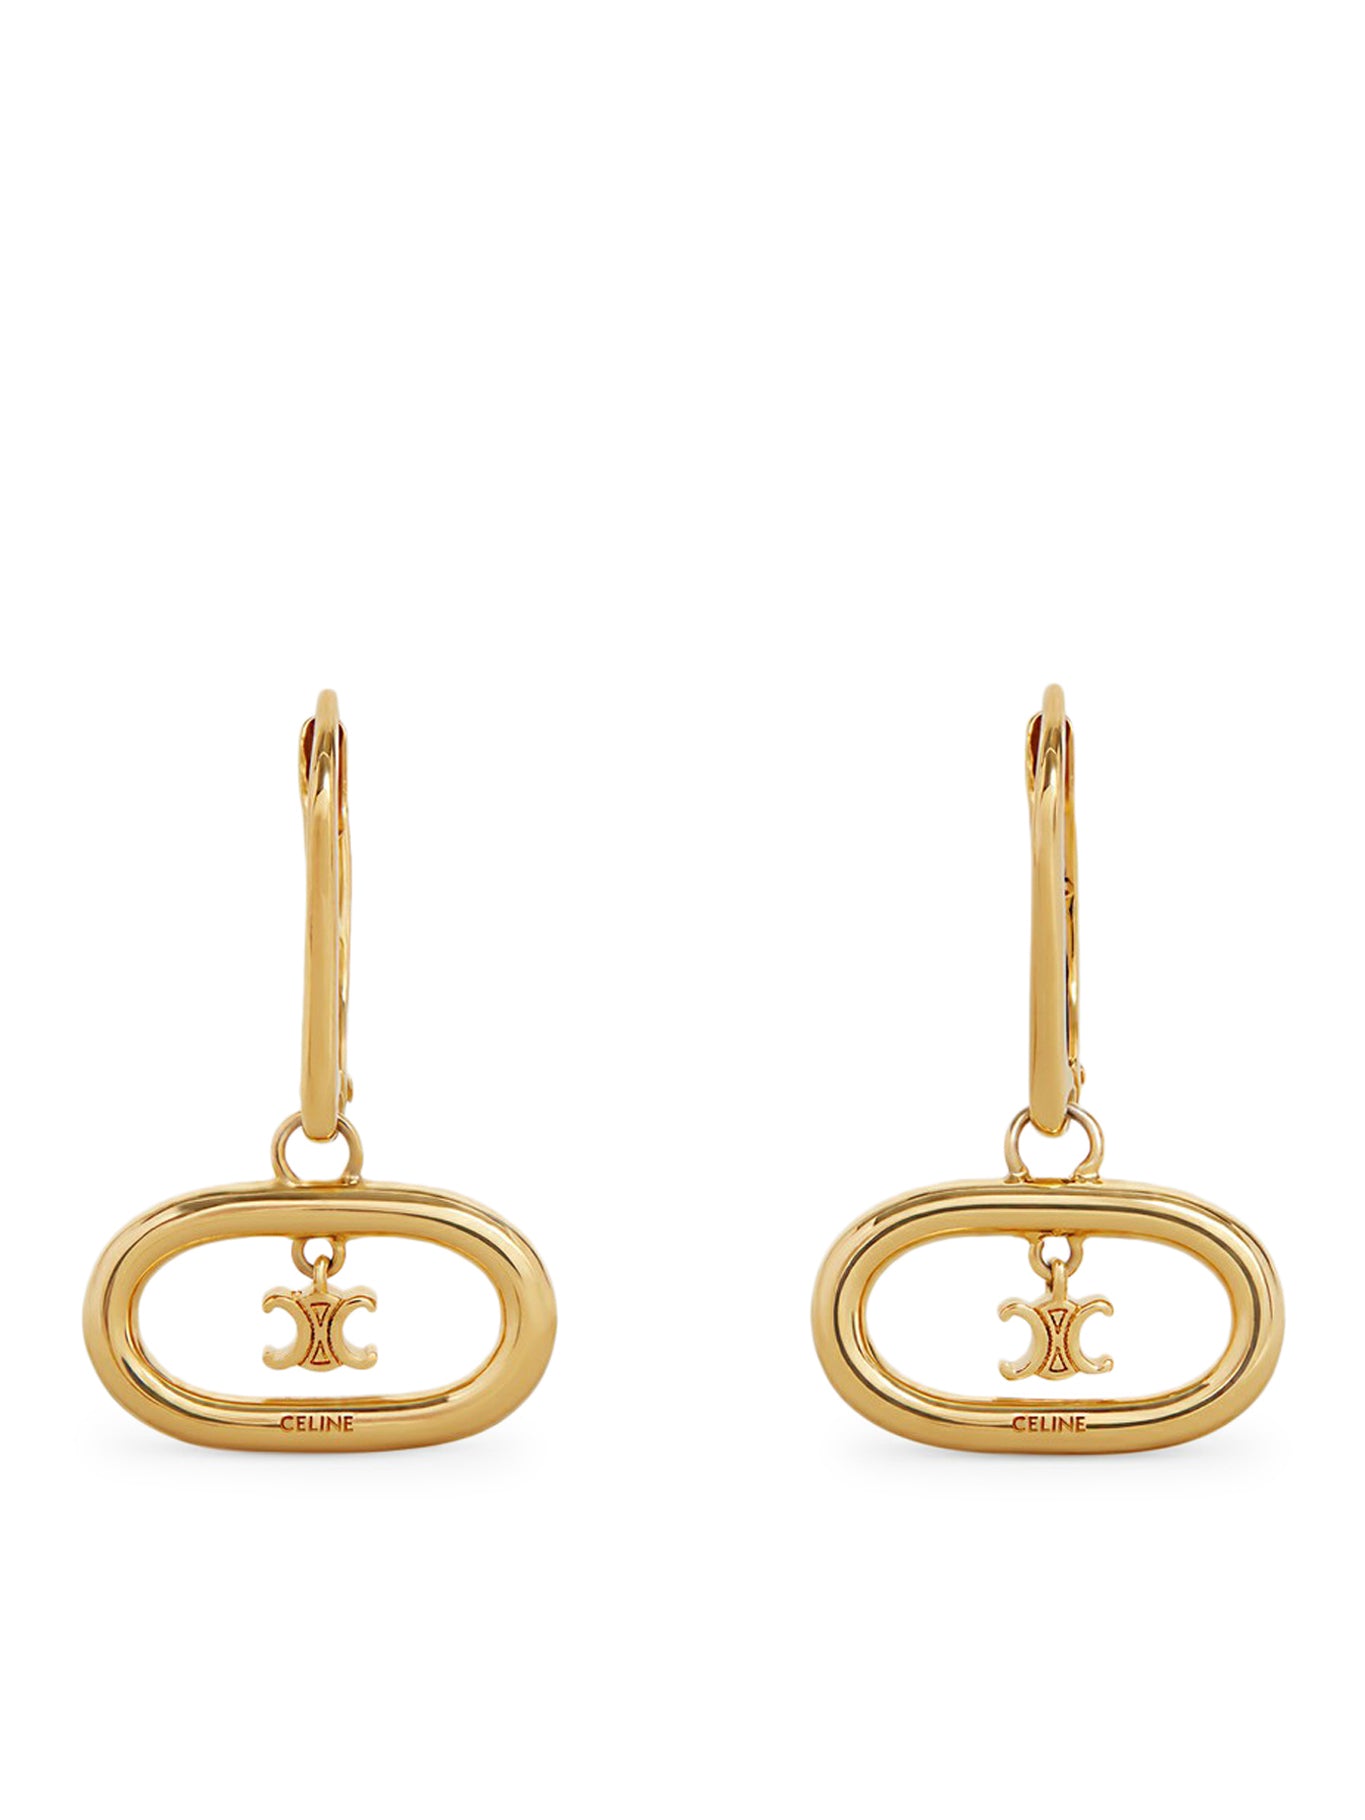 TRIOMPHE MOBILE EARRINGS IN BRASS WITH A GOLD FINISH